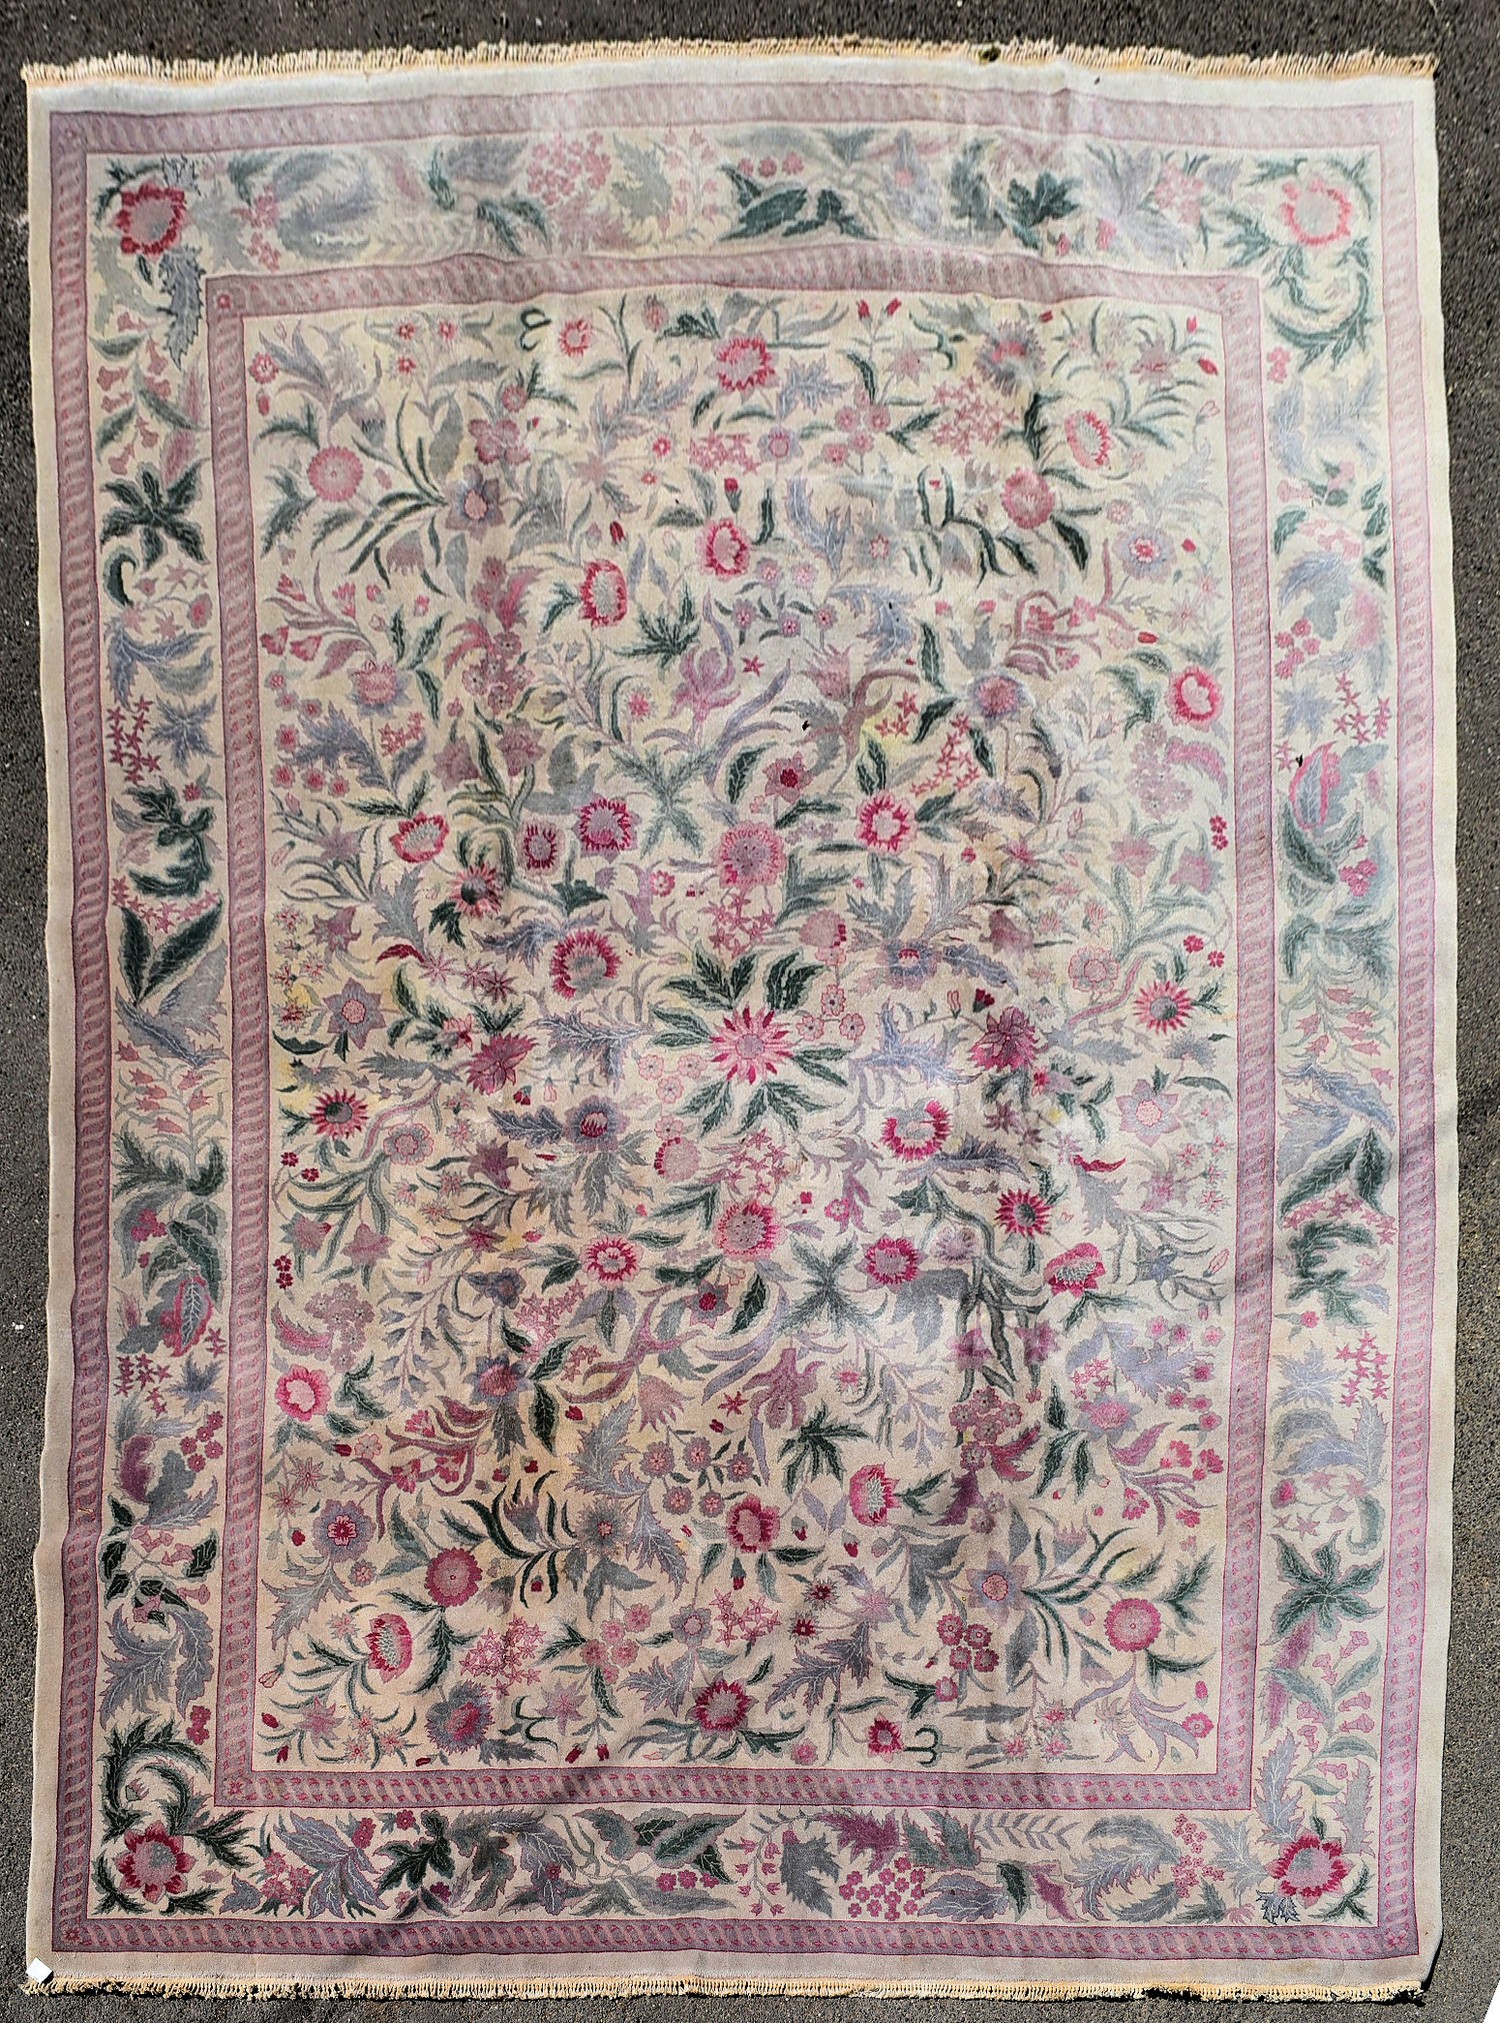 A William Morris design carpet in the Arts and Crafts manner with foliate and floral pattern